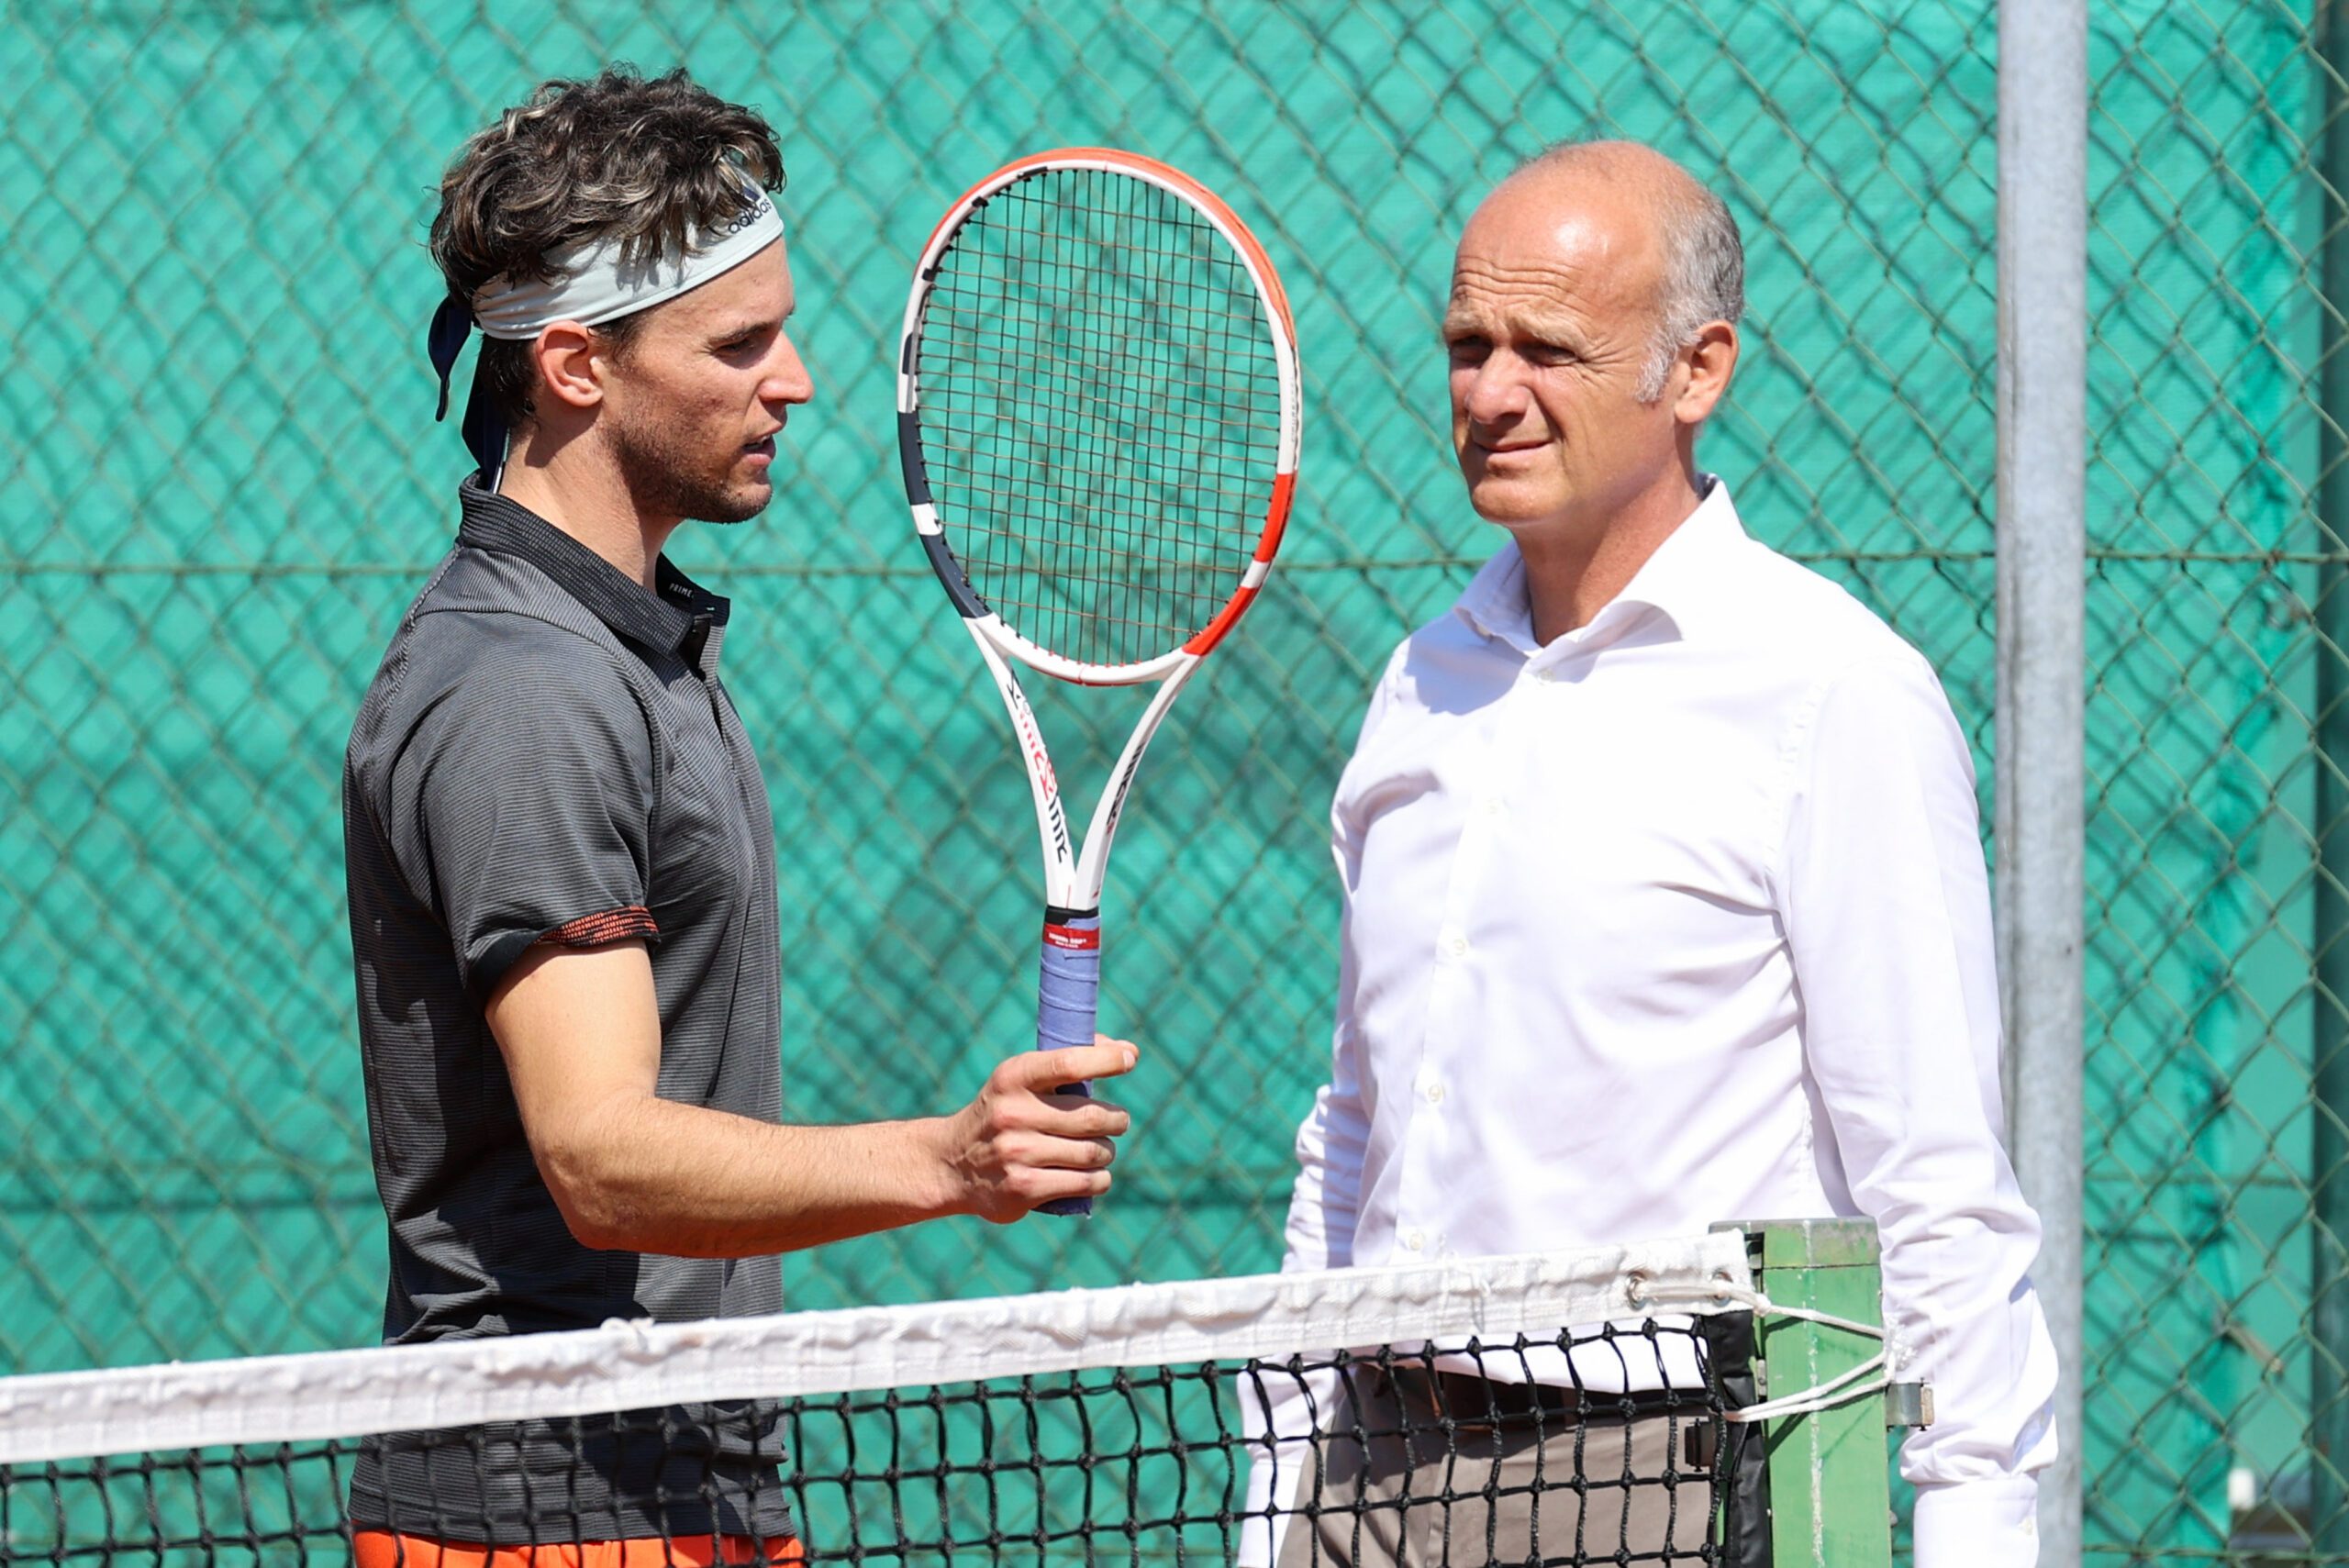 WIEN,AUSTRIA,28.APR.20 - TENNIS - ATP, training after lightening the restrictions due to the SARS-CoV-2 crisis, corona crisis. Image shows Dominic Thiem (AUT) and Manager Herwig Straka.